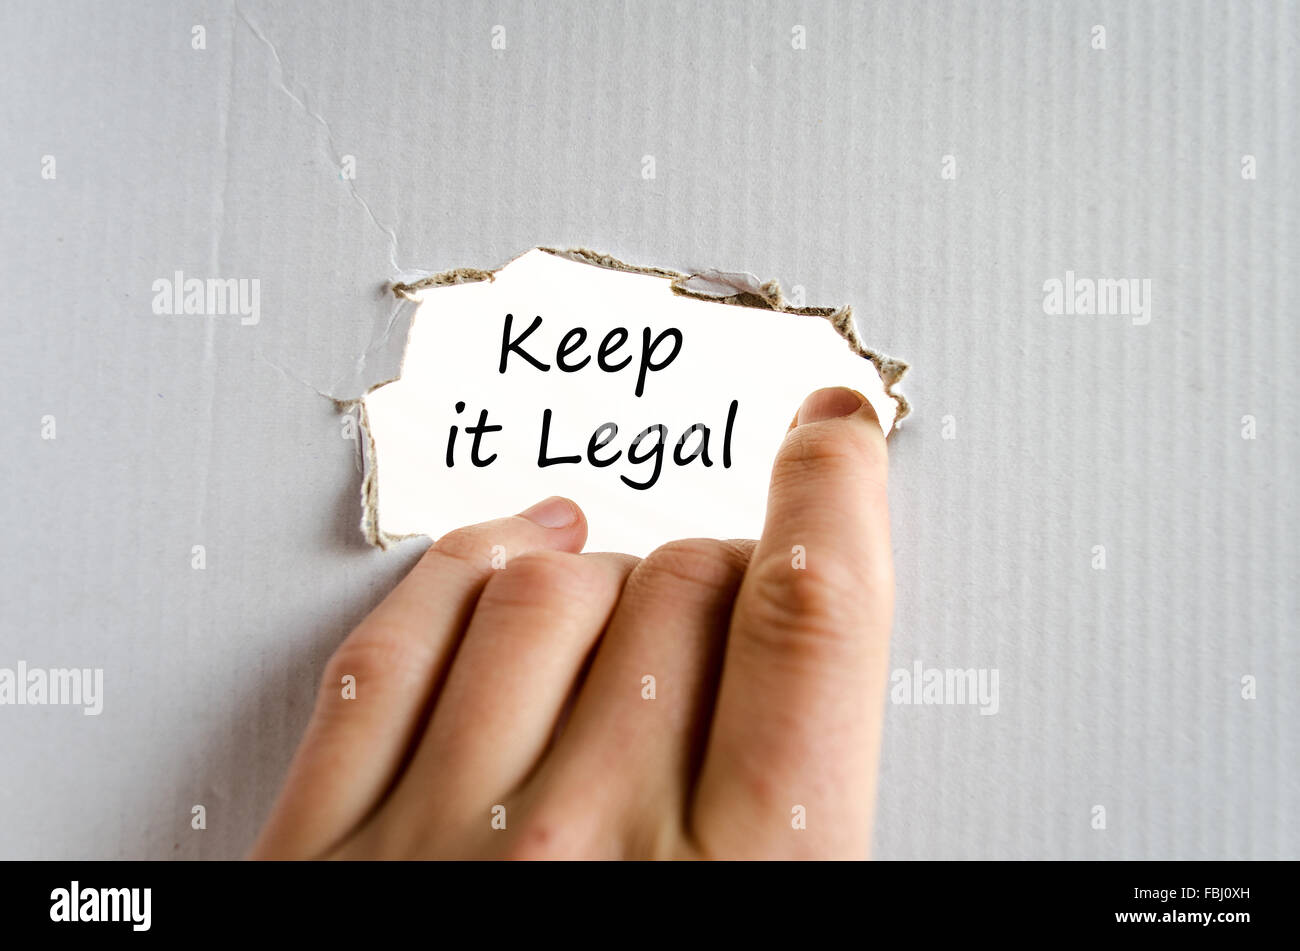 Keep it legal text concept isolated over white background Stock Photo